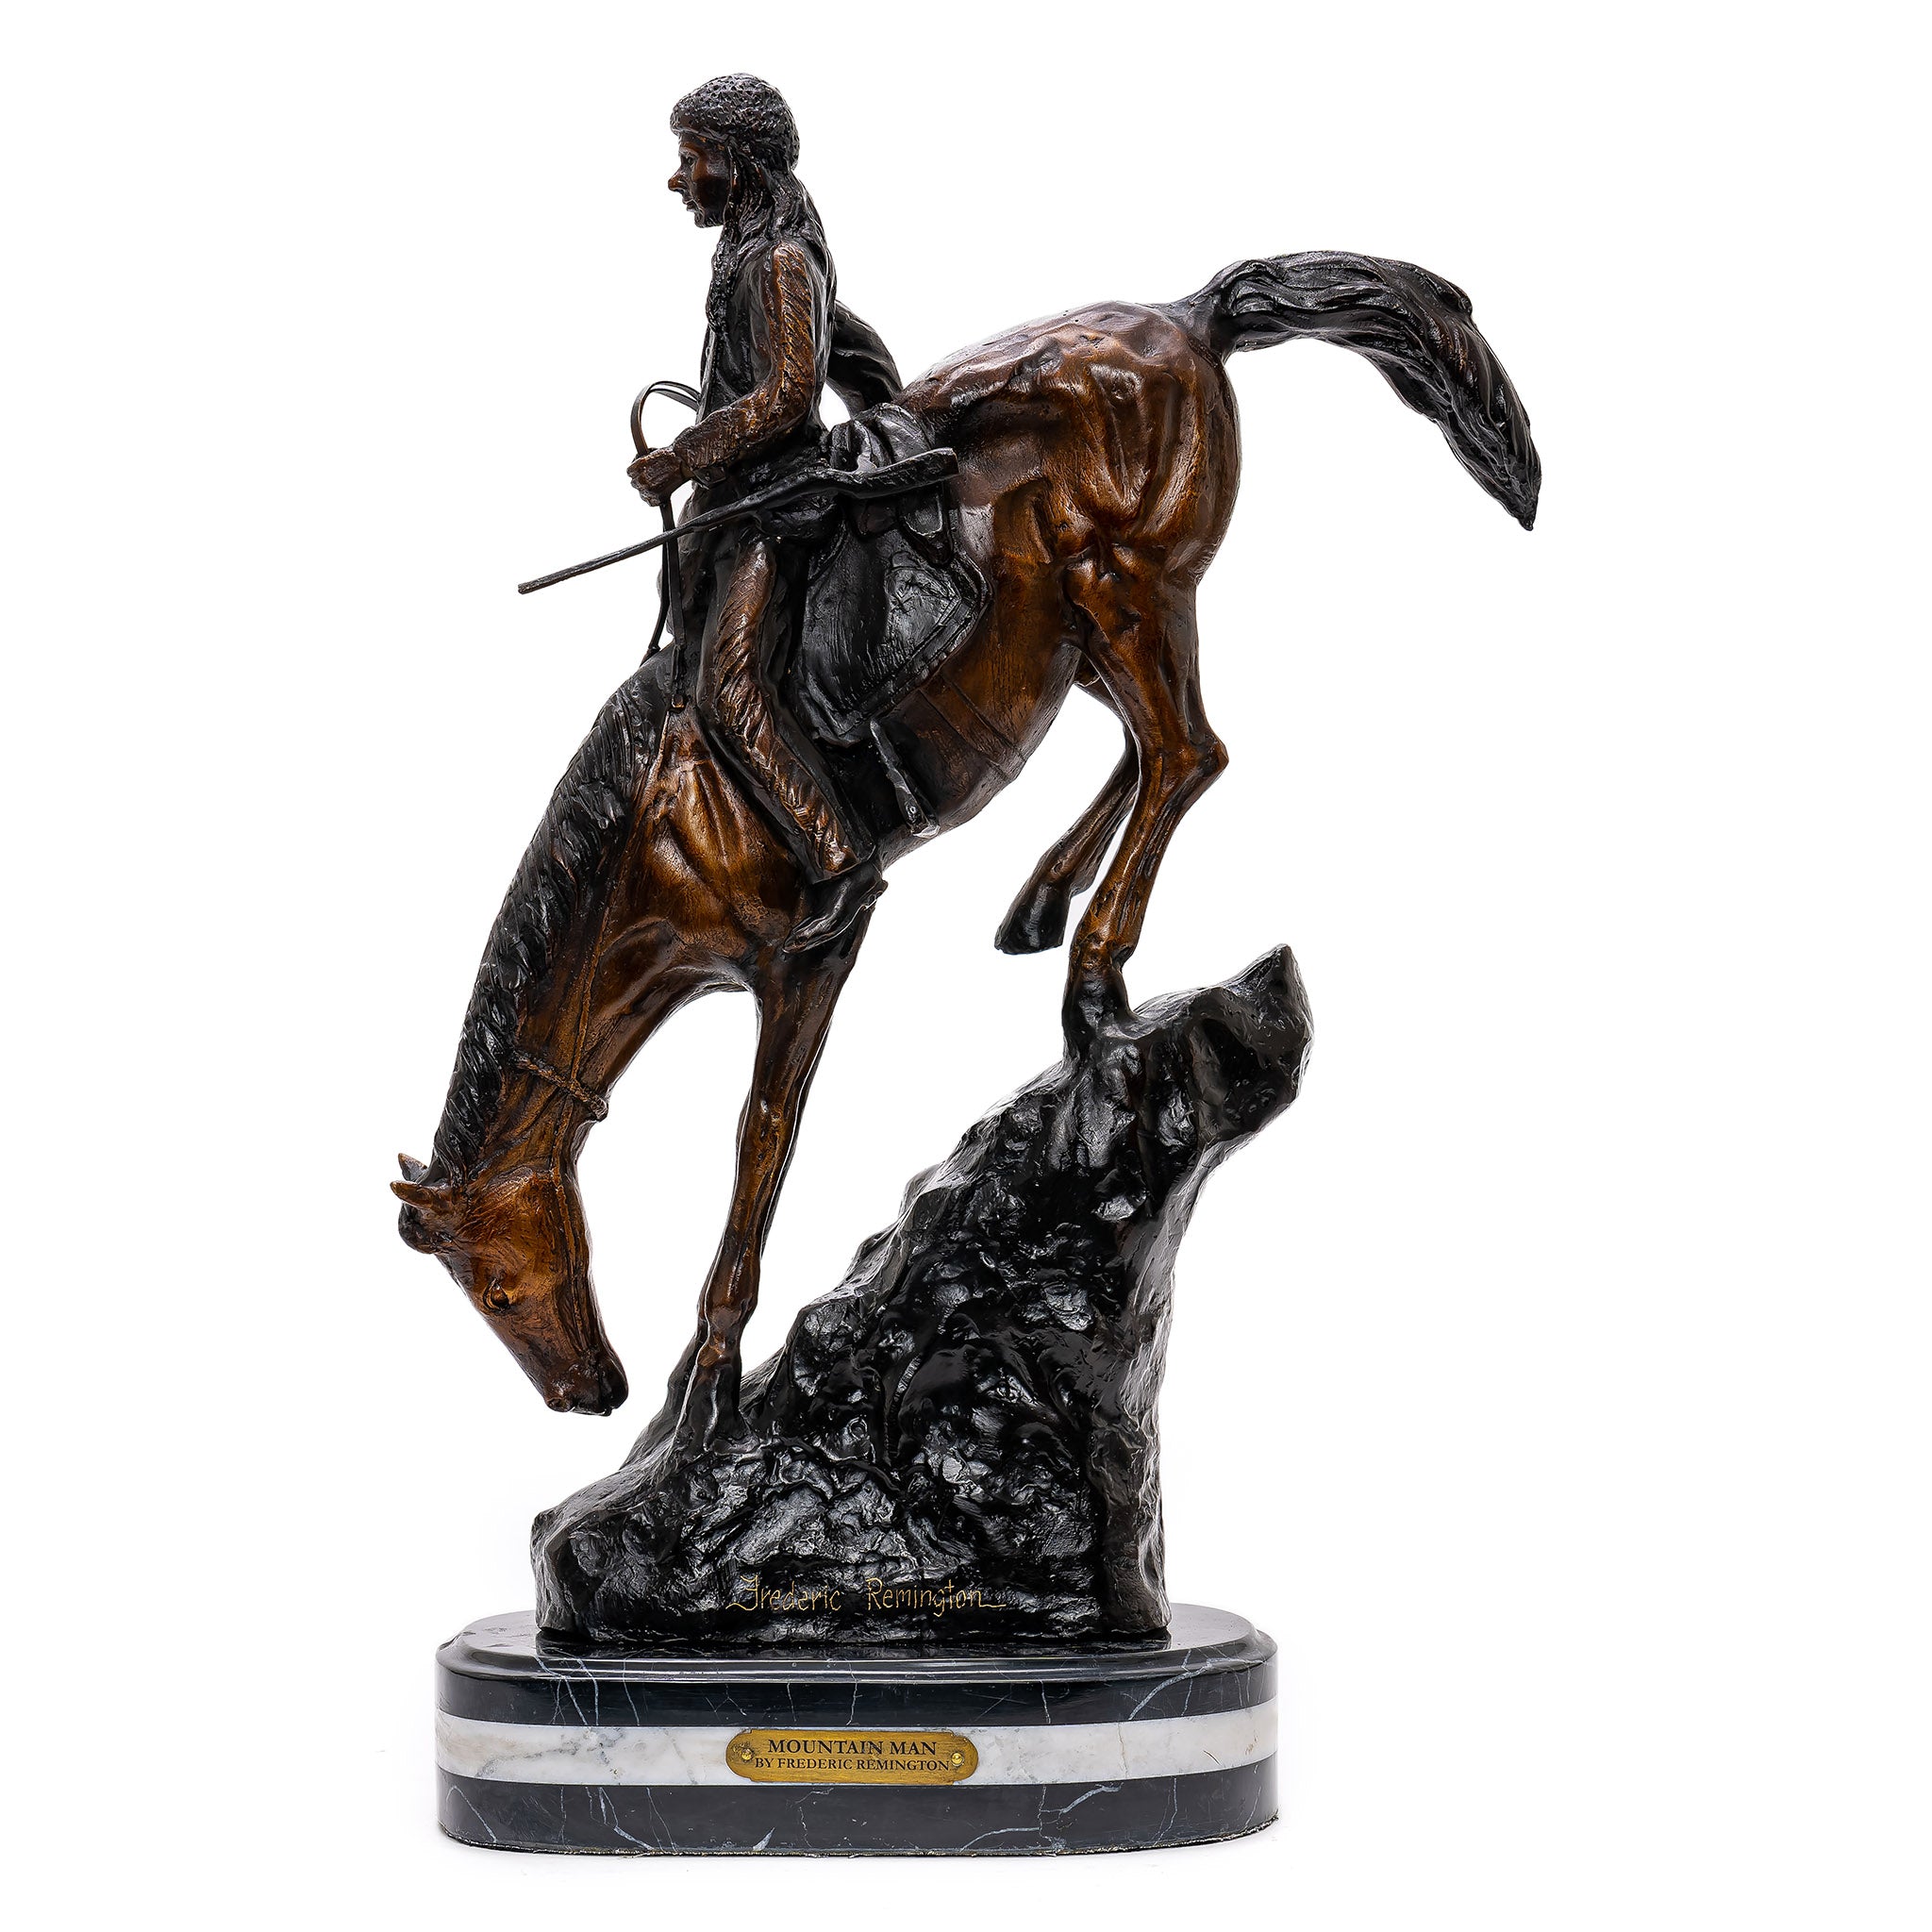 All bronze sculpture by Frederic Remington entitled Mountain Man